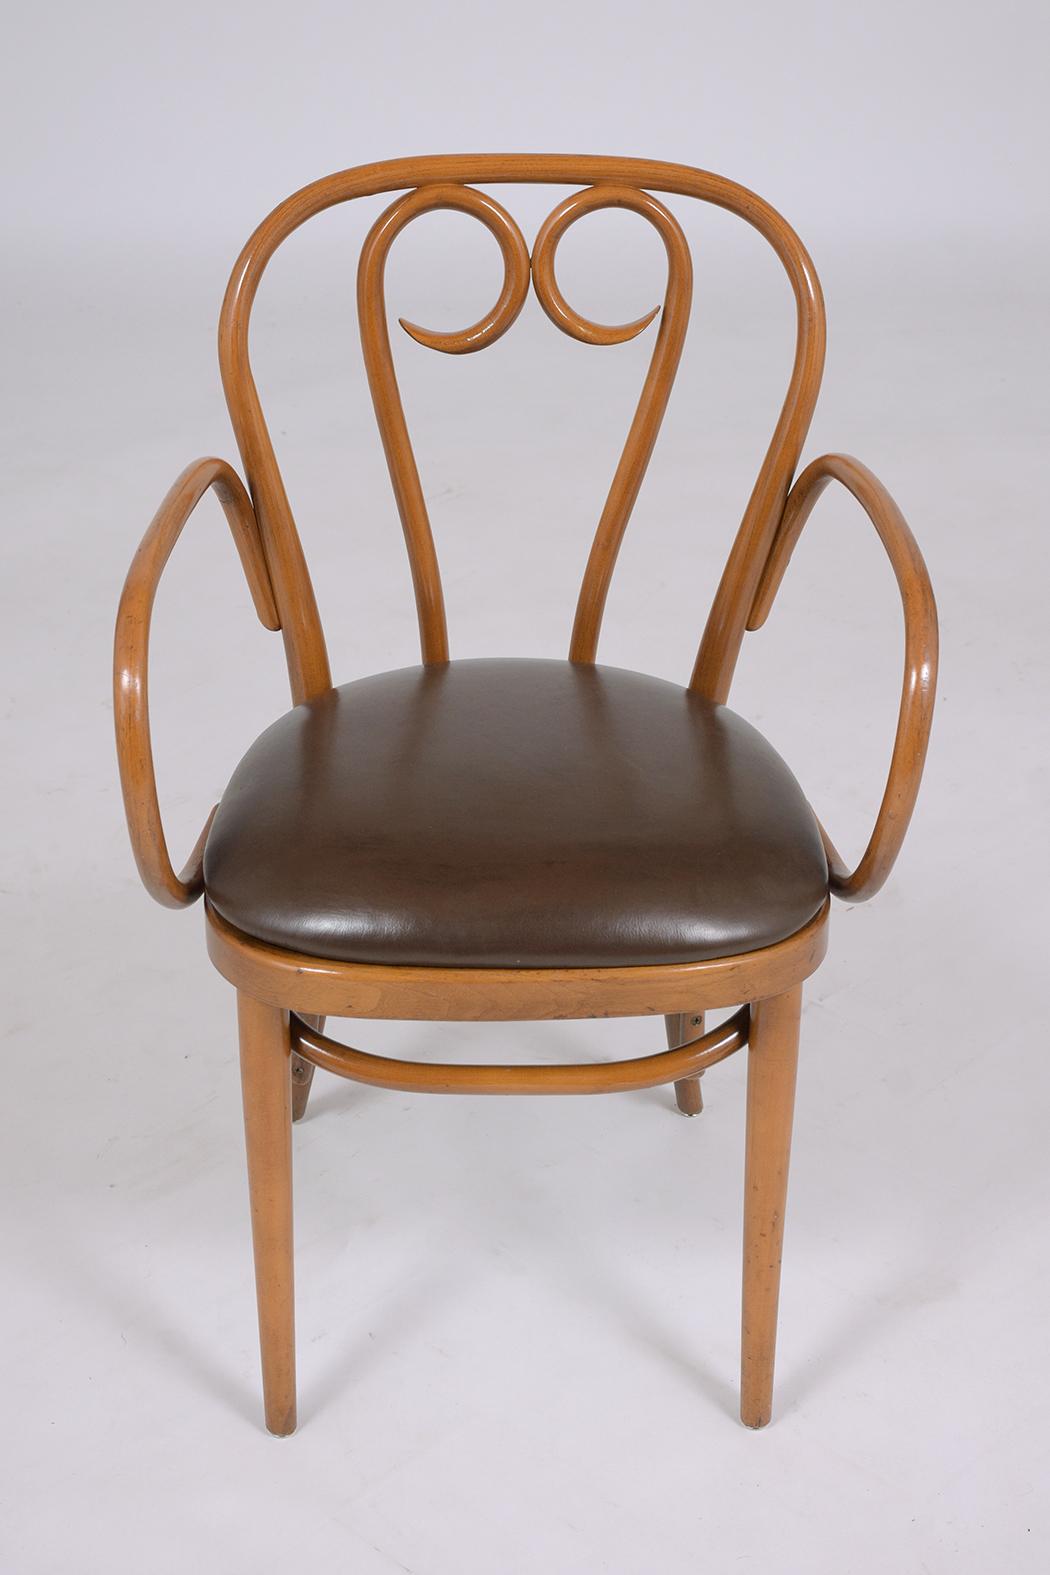 Art-Deco Thonet Bentwood Leather Dining Chairs with Walnut Finish - Set of Six In Good Condition For Sale In Los Angeles, CA